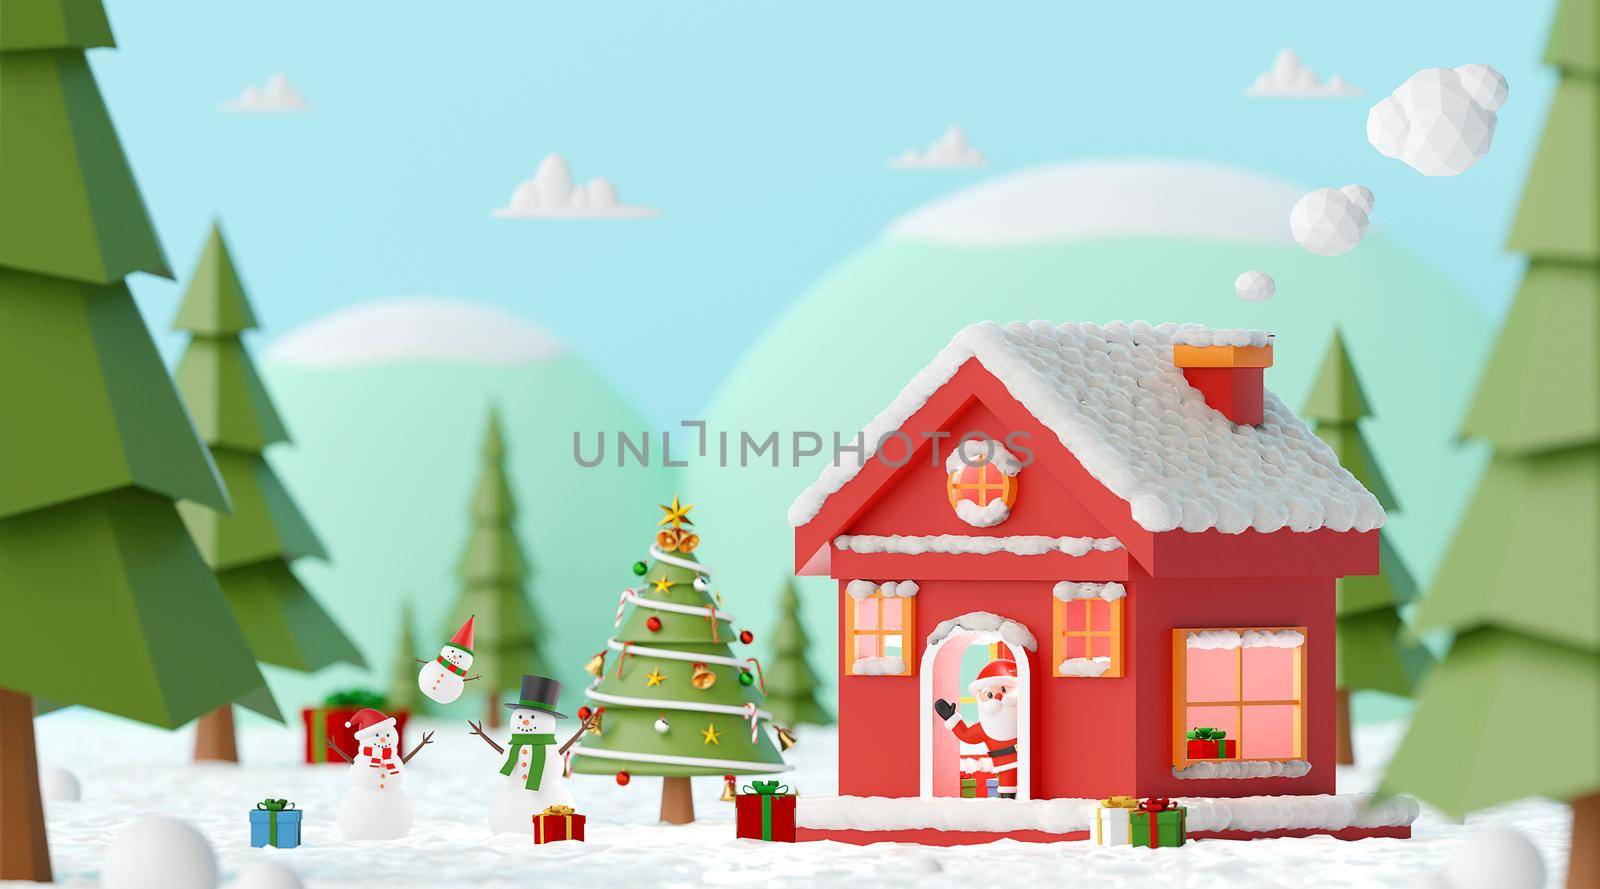 Merry Christmas and Happy New Year, Christmas Party with Santa Claus and Snowman at the red house in a pine forest, 3d rendering by nutzchotwarut